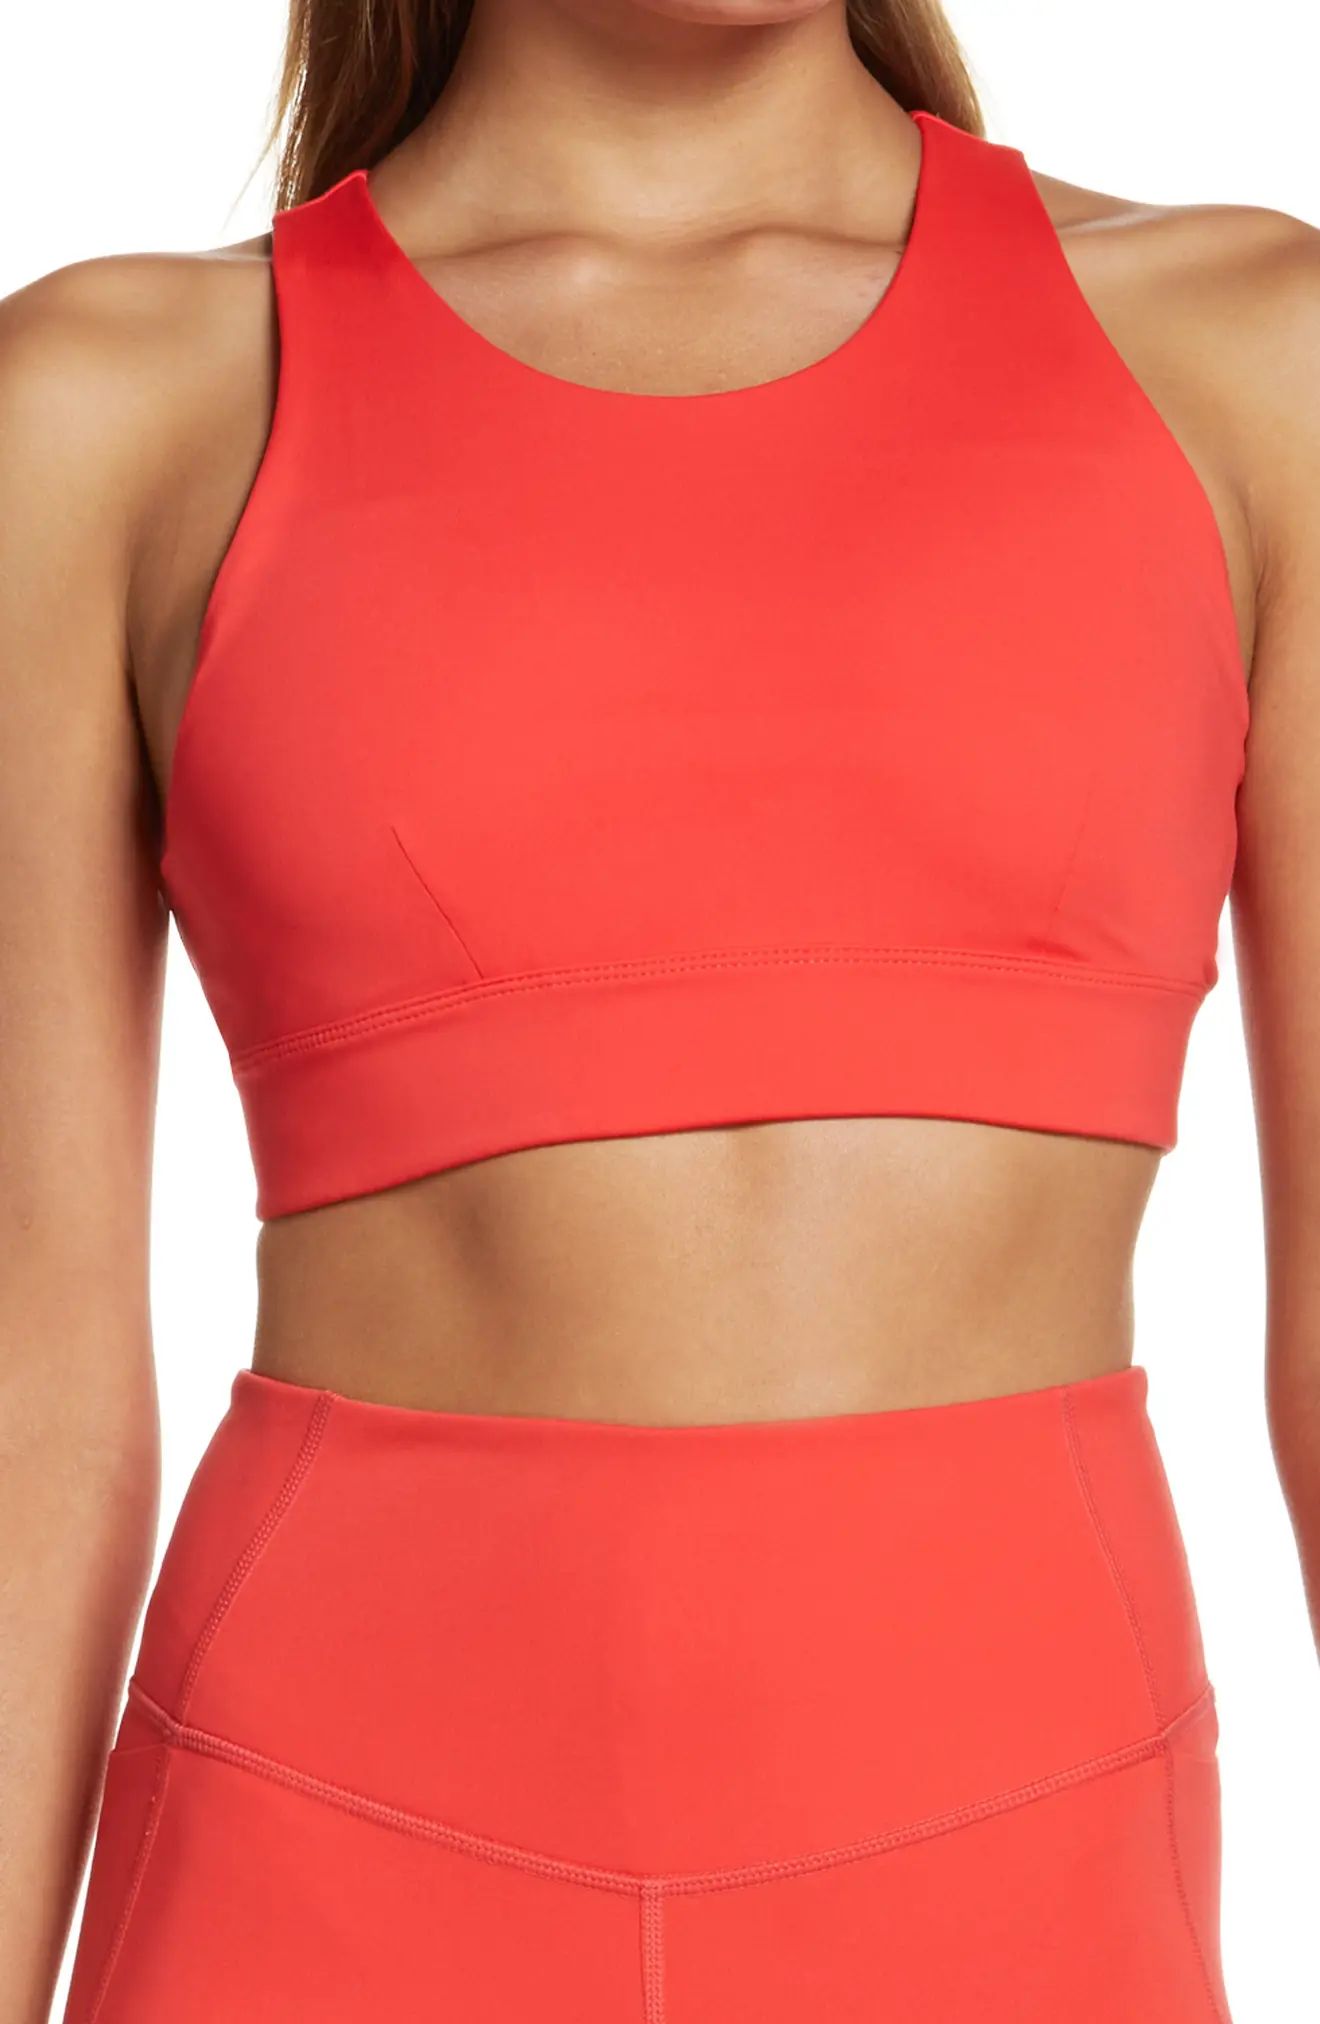 Zella Exhale Studio Lite Sports Bra in Red Hibiscus at Nordstrom, Size X-Small | Nordstrom